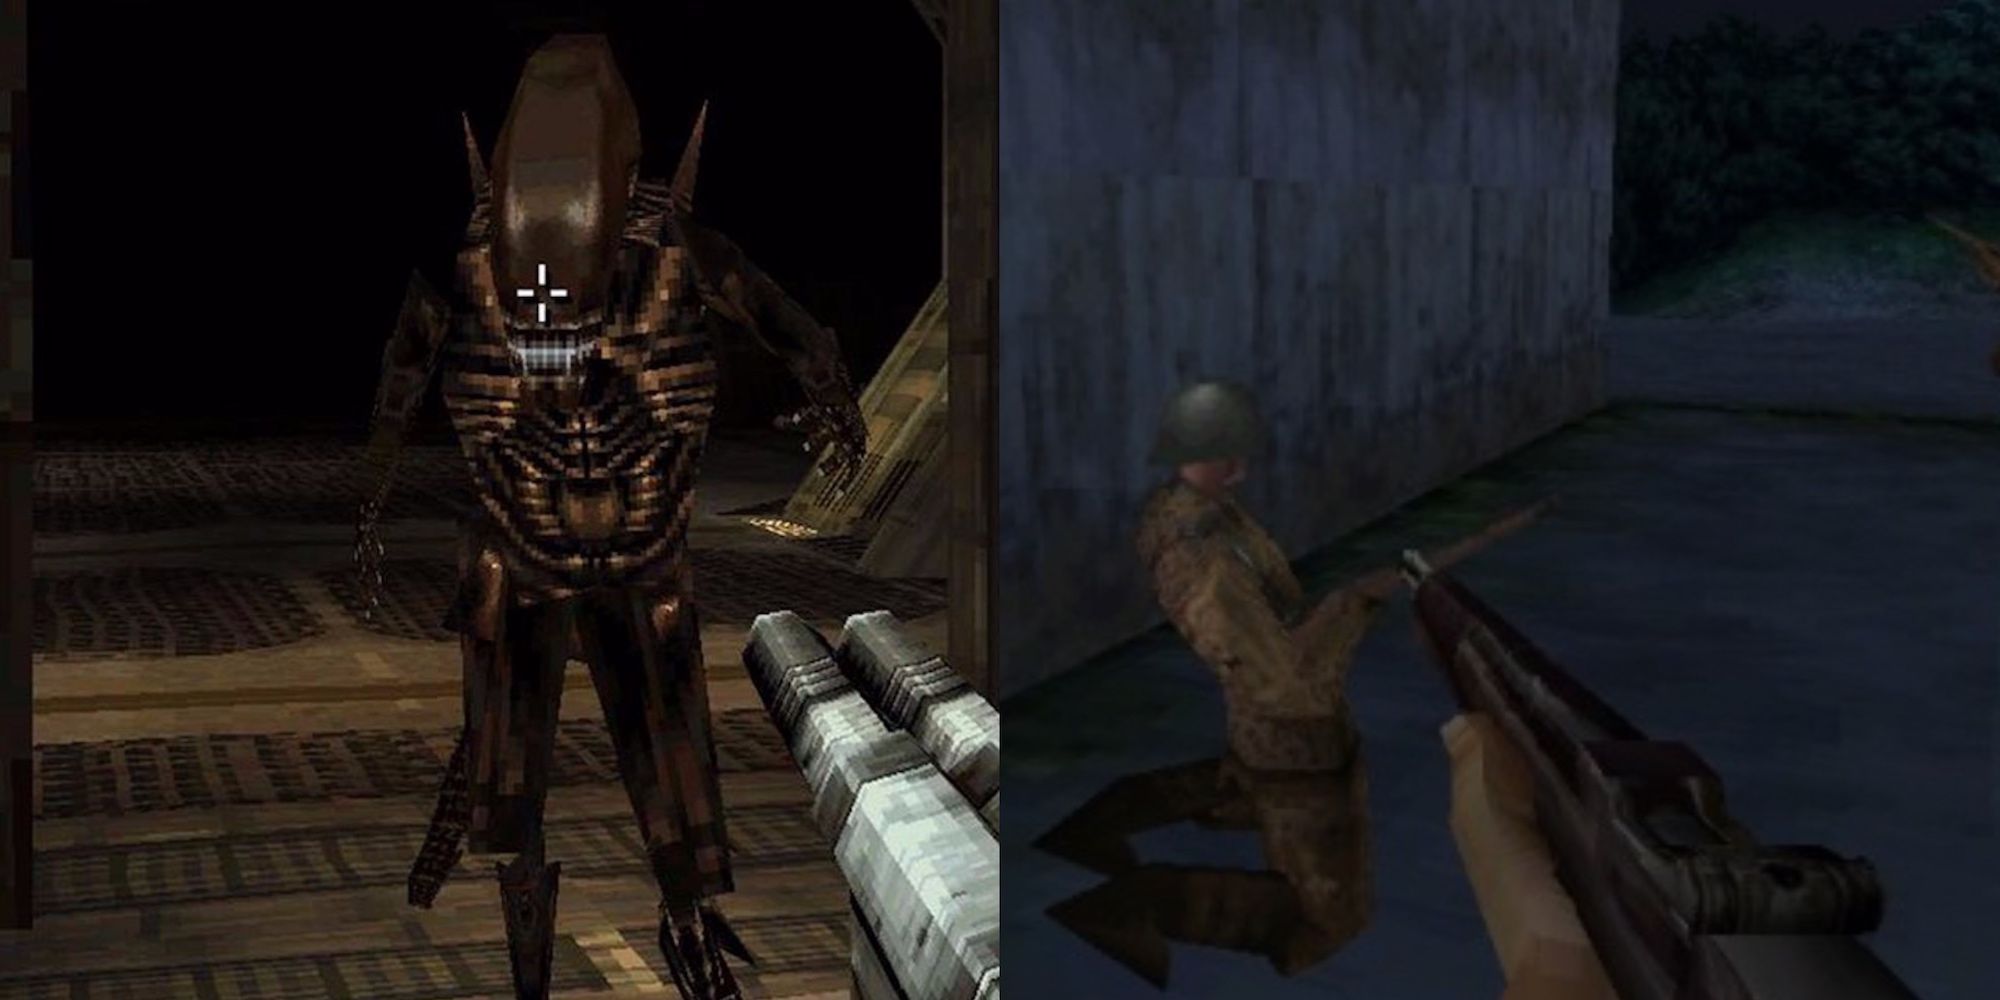 A collage showing a weapon aiming at an alien from Alien and another weapon aiming at a soldier from Medal of Honor.